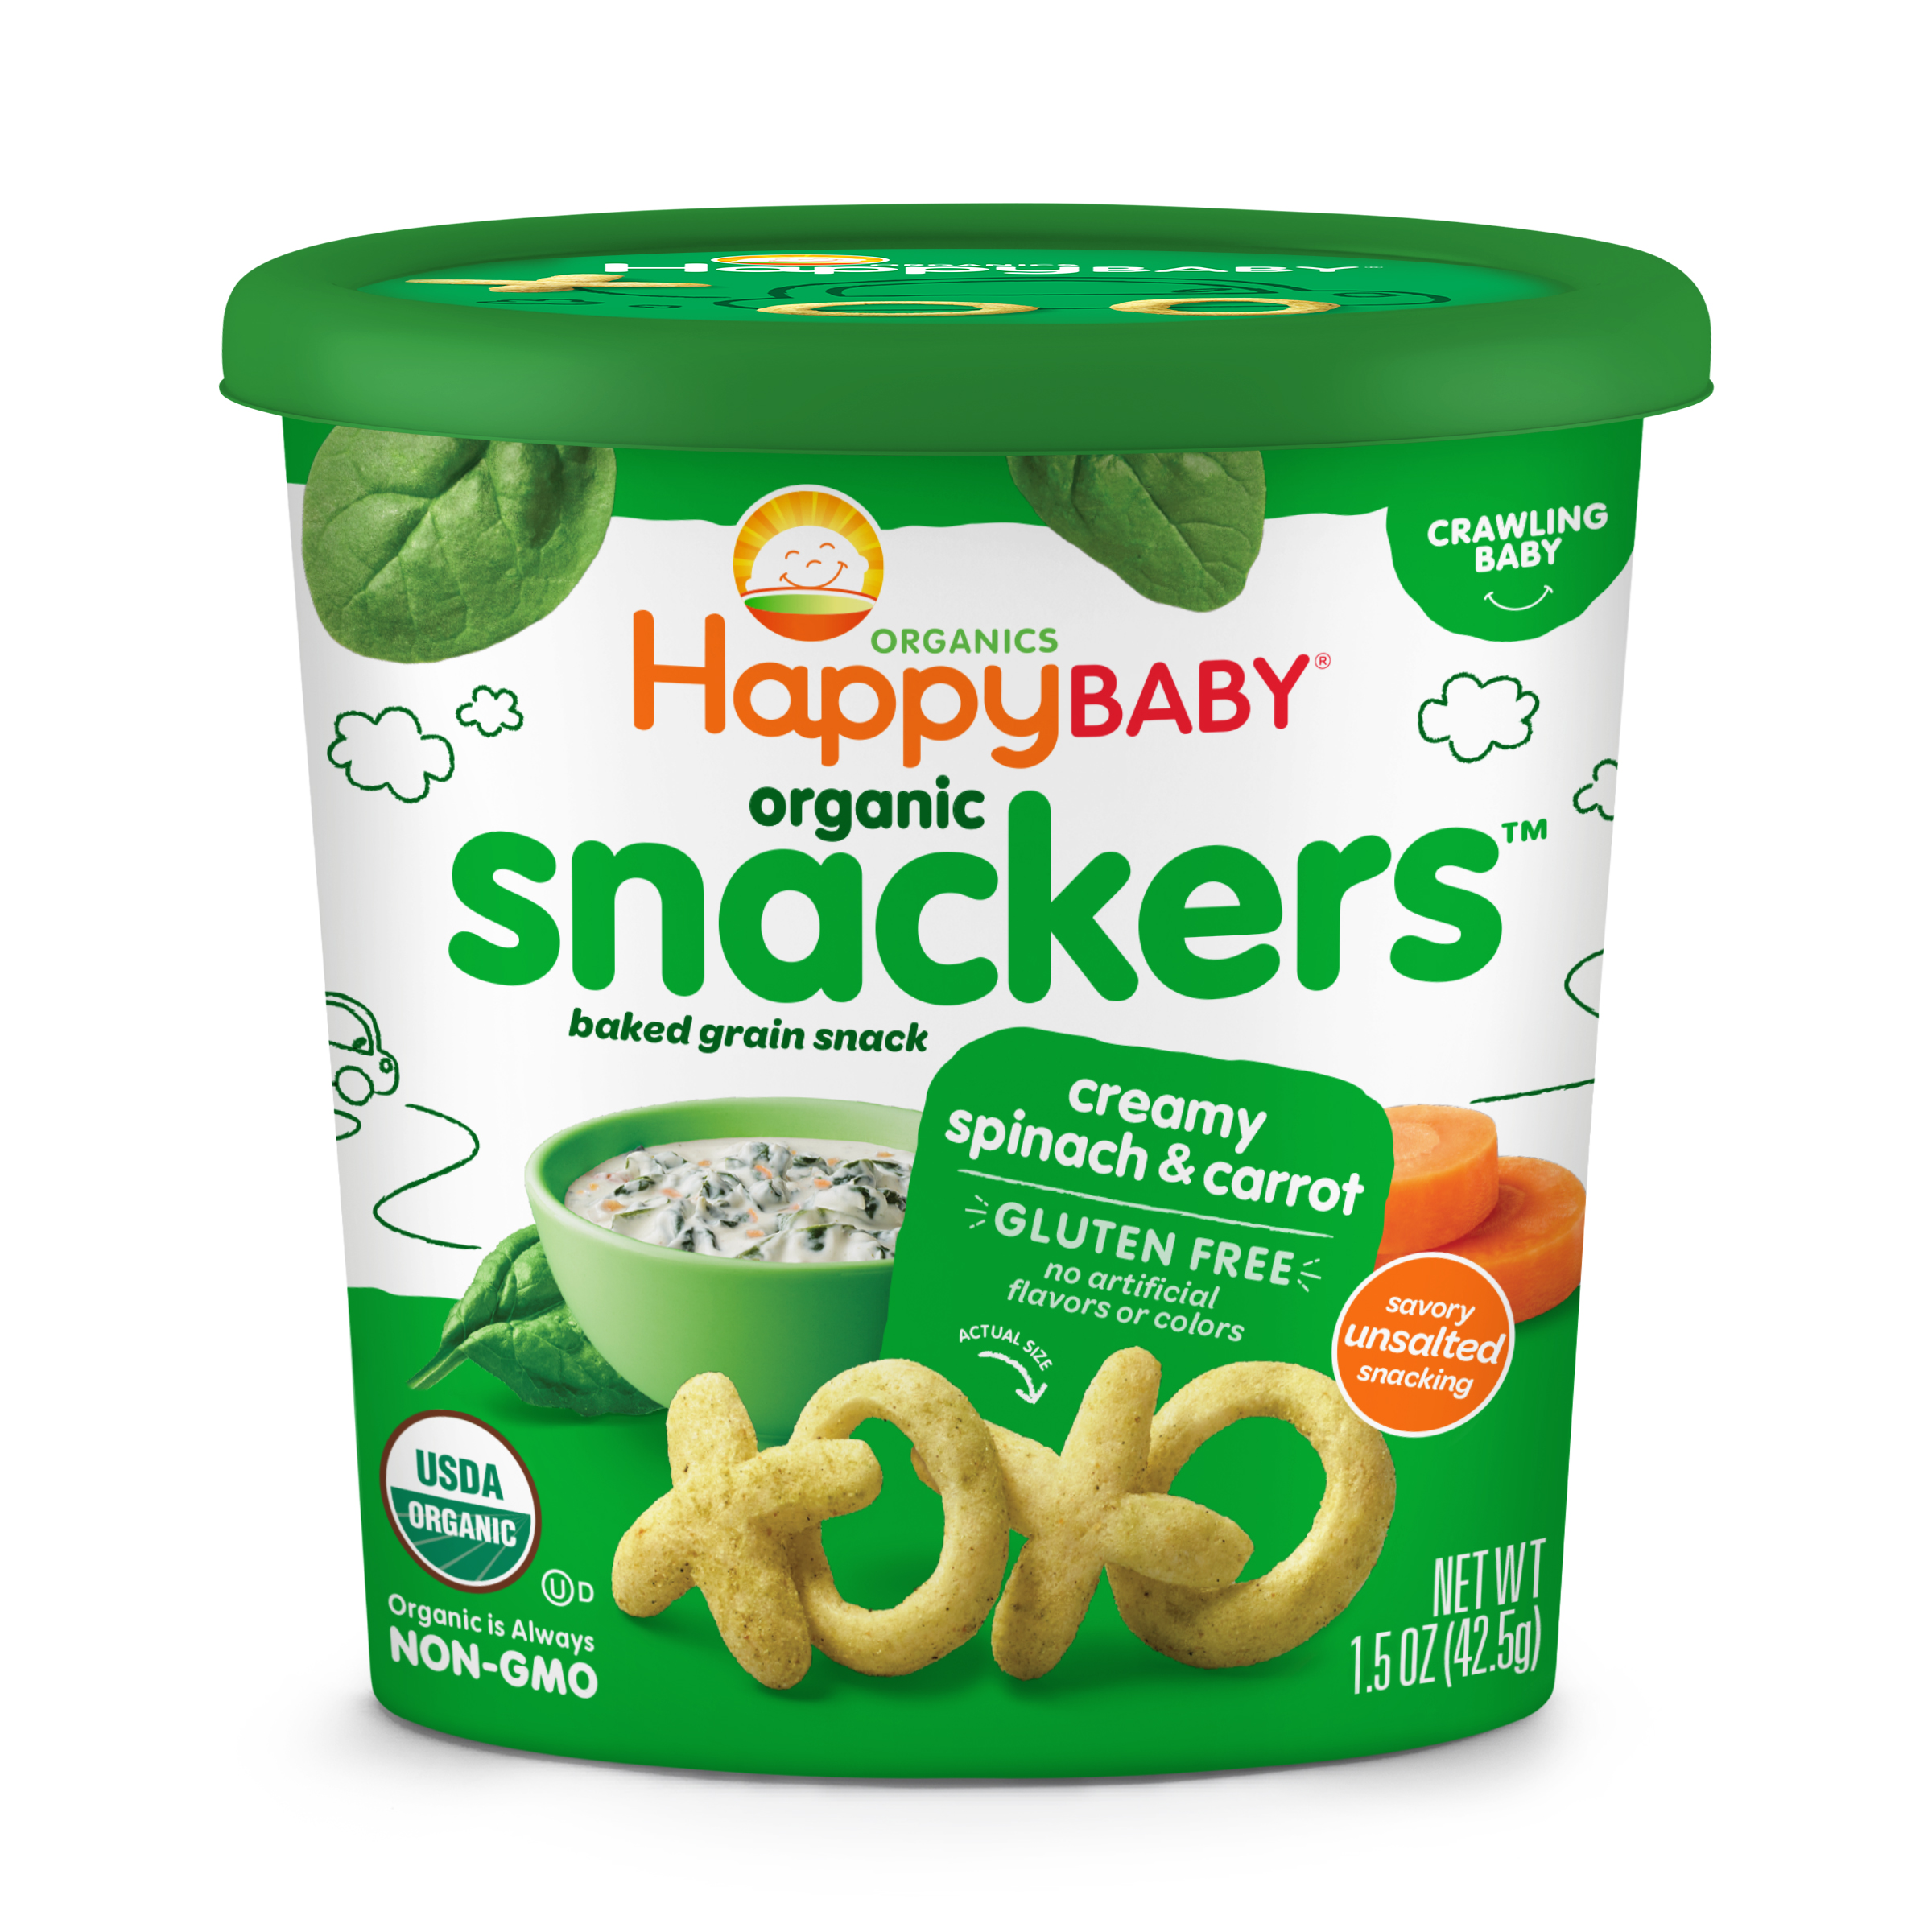 Happy Baby Creamy Spinach & Carrot Snackers 6 units per case 1.5 oz